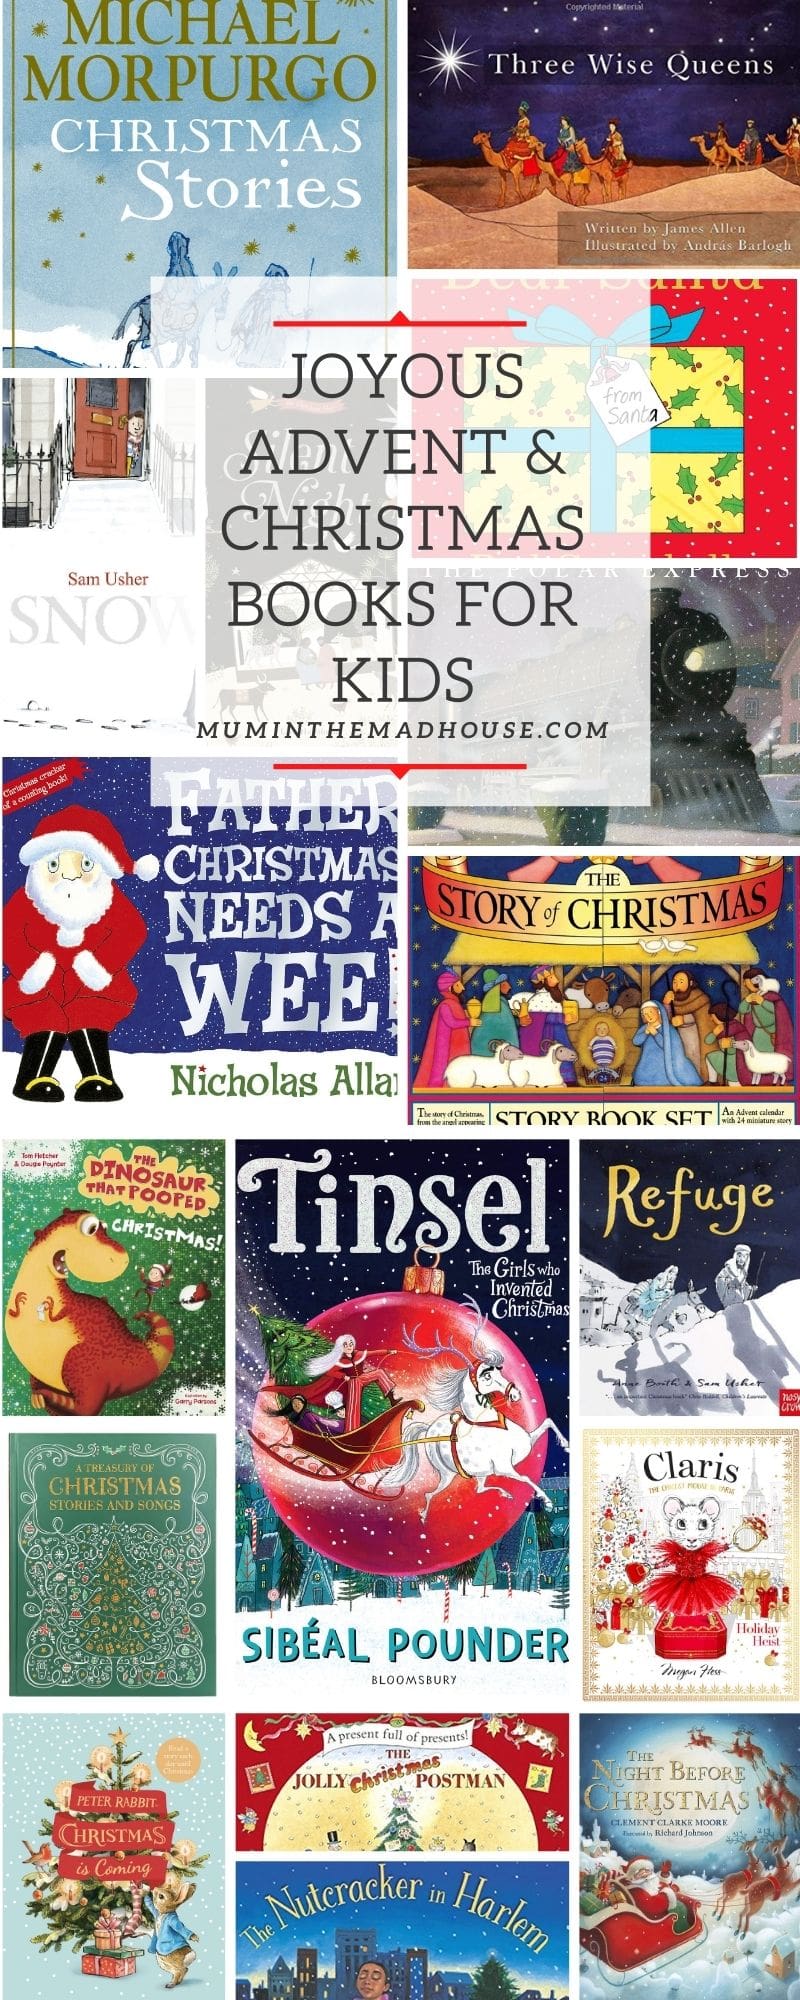 Joyous Advent and Christmas Books for Children.  Celebrate with these delightful festive books for all the family.